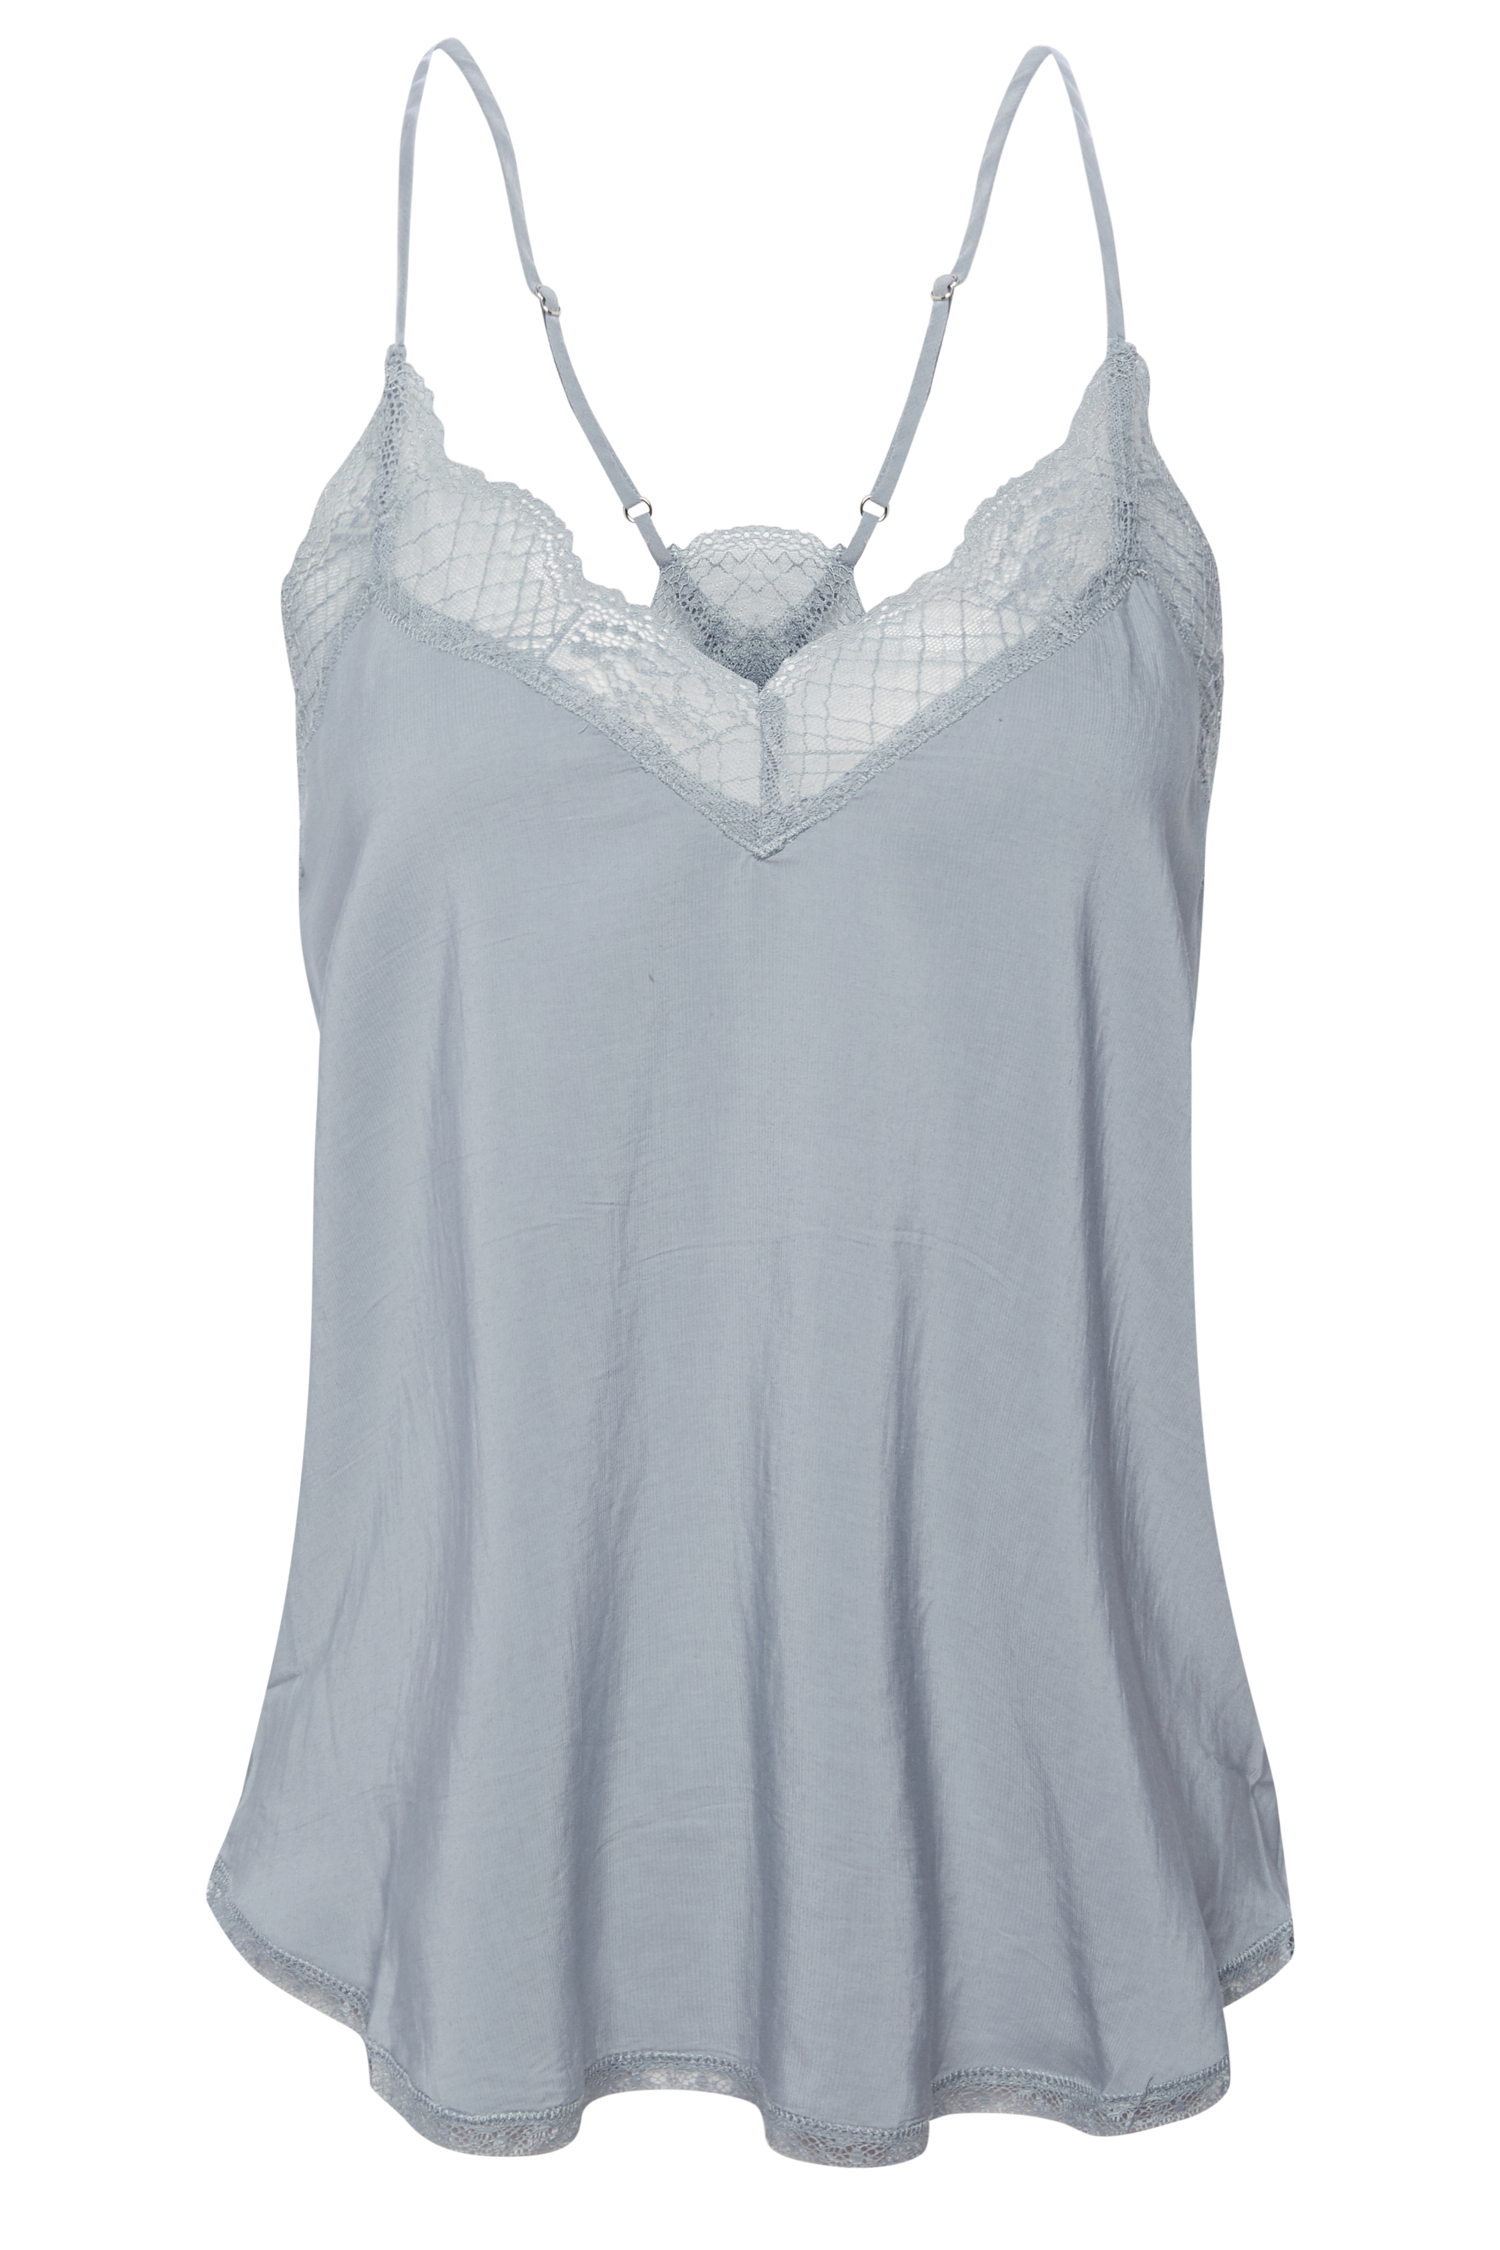 Lace Insert Cami